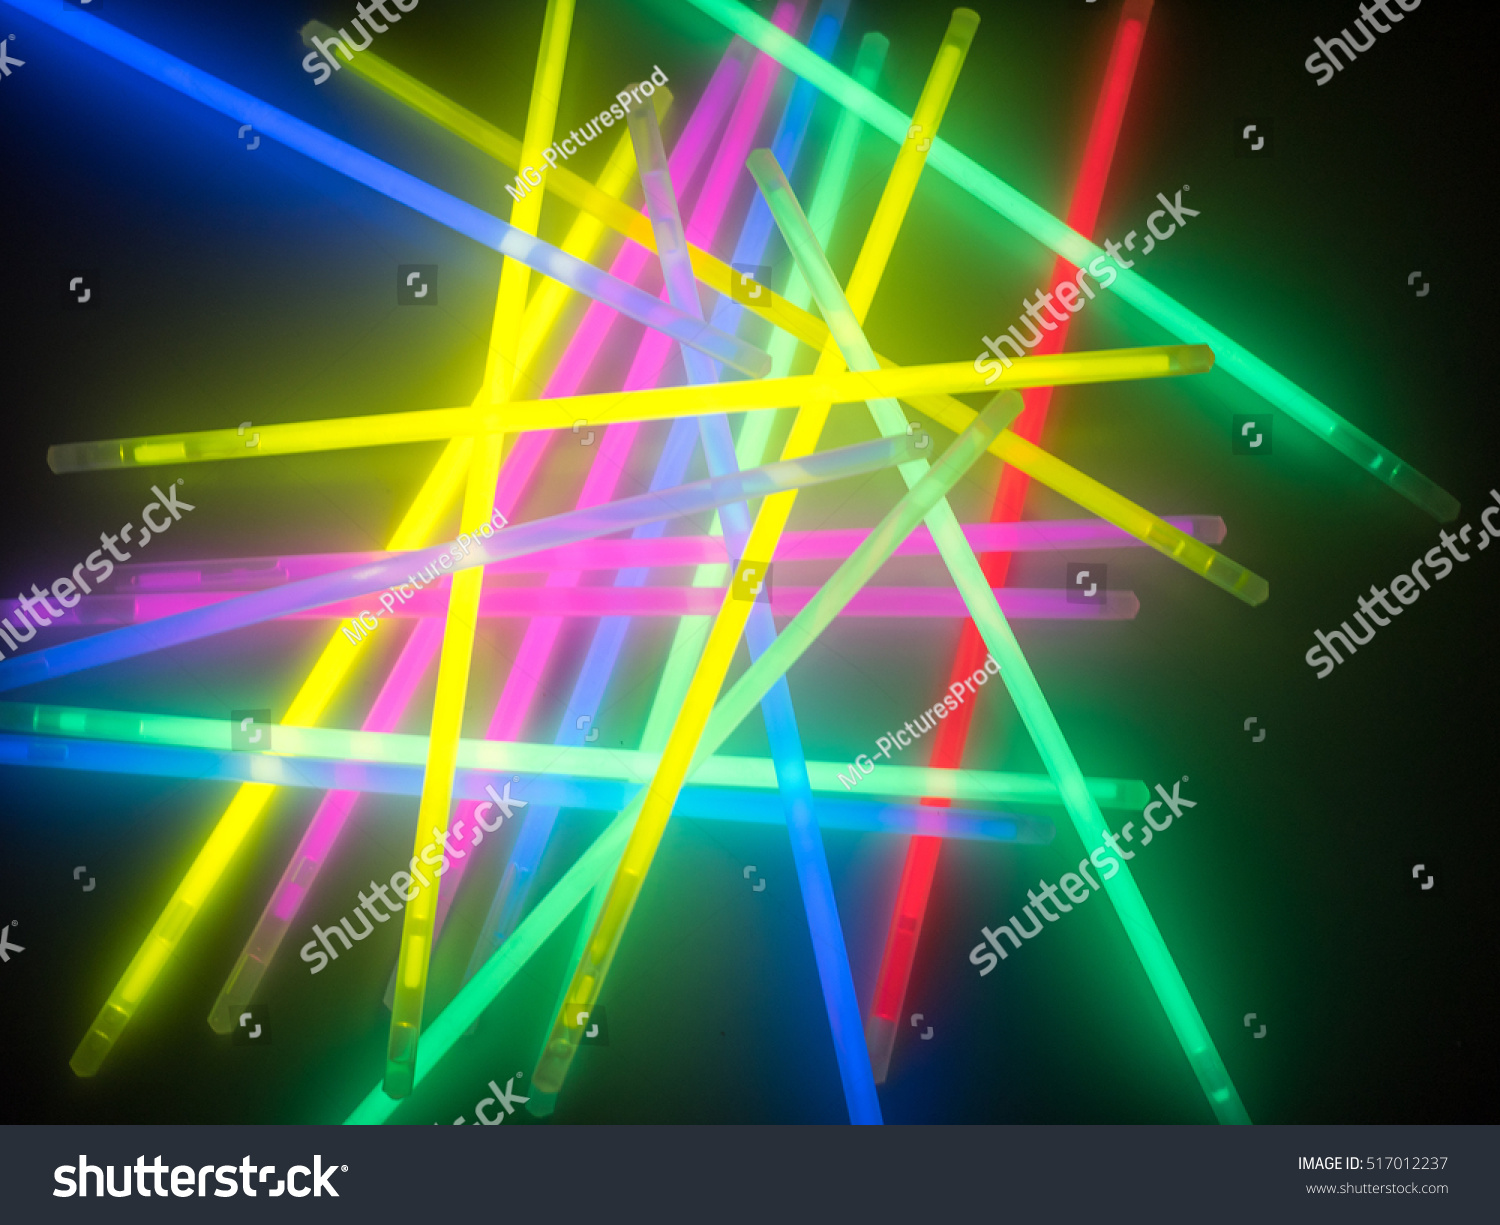 Colorful fluorescent light neon on black background
 #517012237